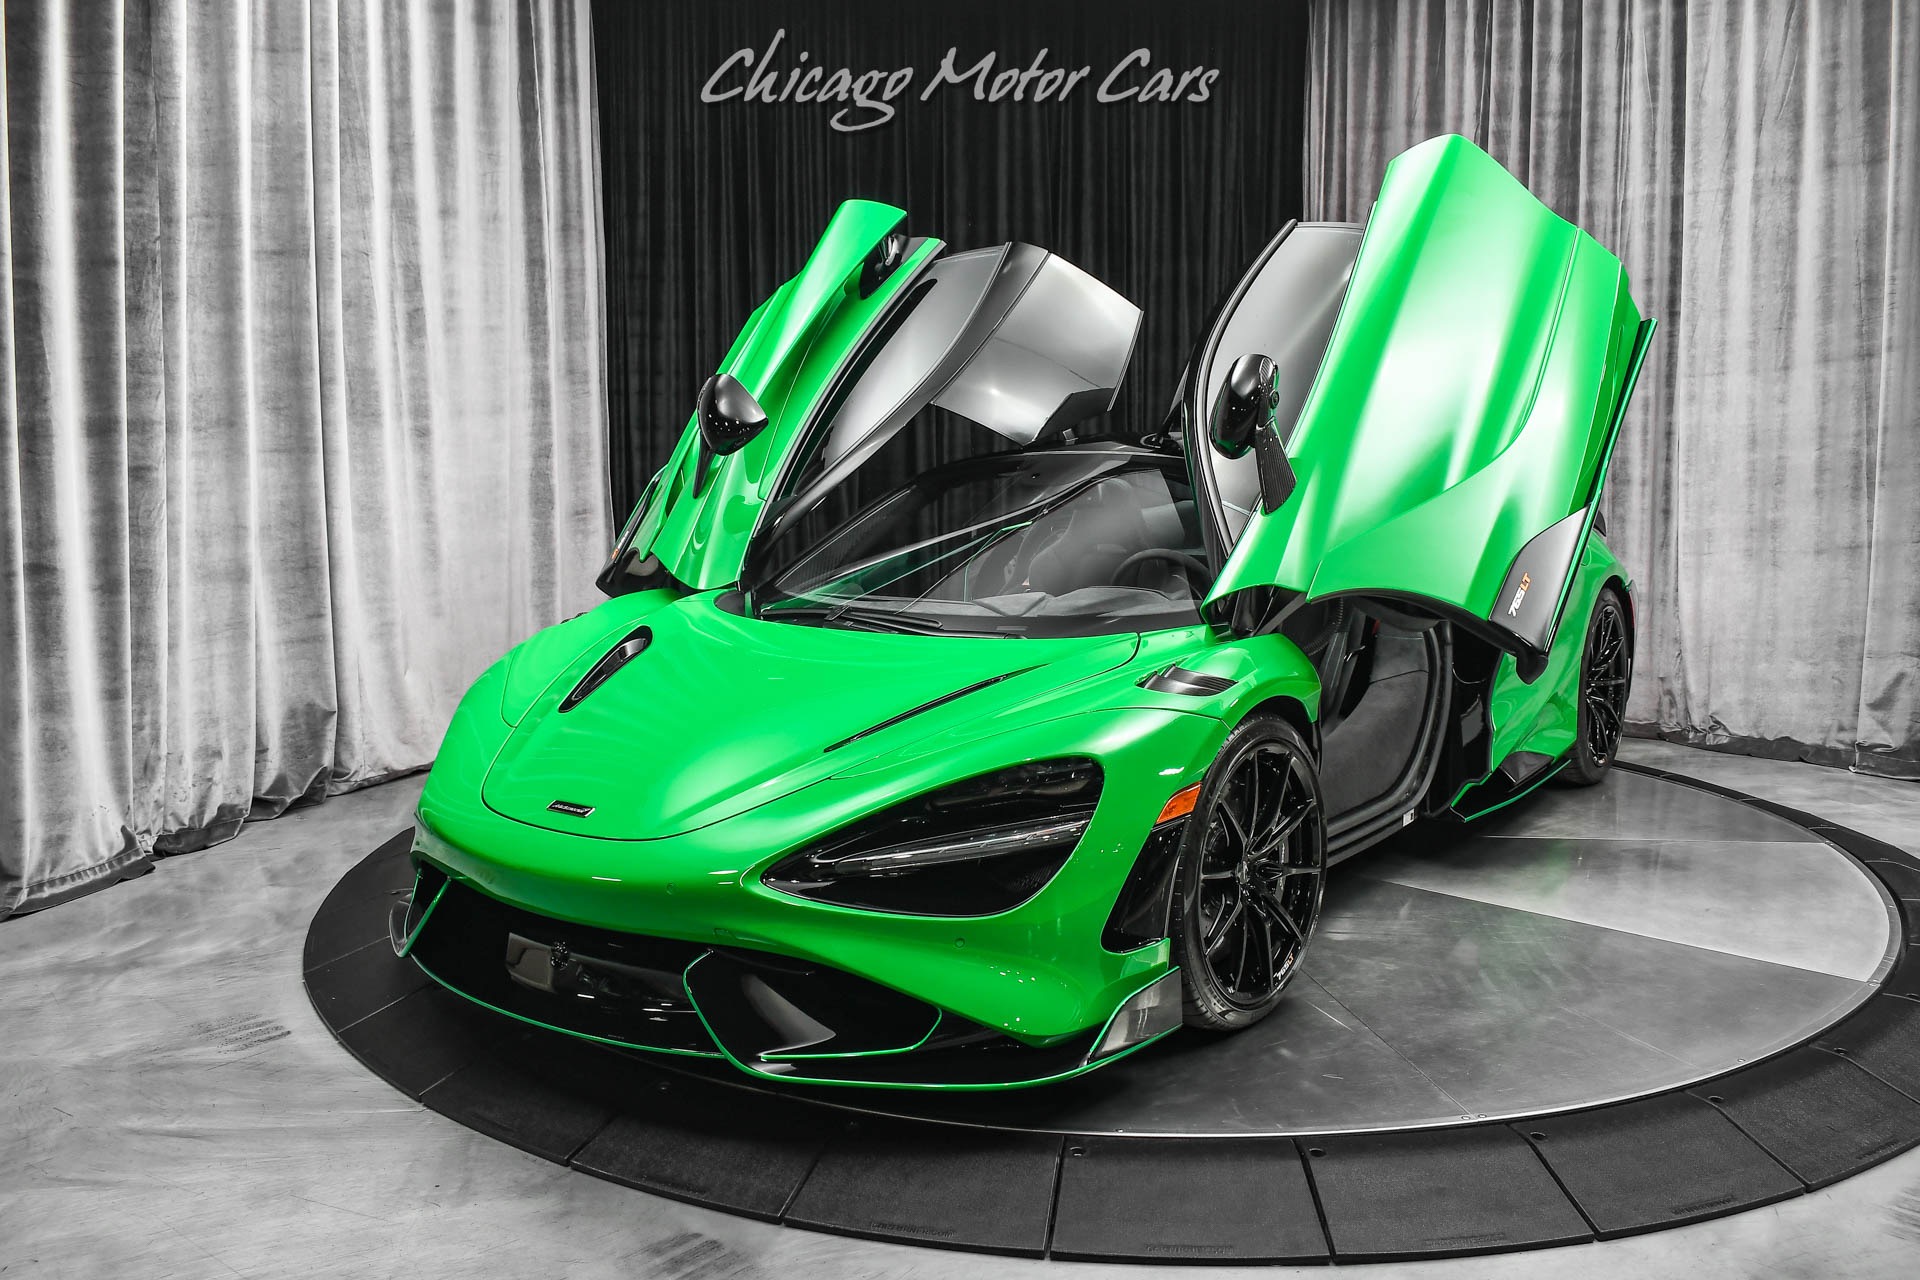 Used 2021 McLaren 765LT Coupe ONLY 271 Miles! 1/1 MSO Paint! MSO 